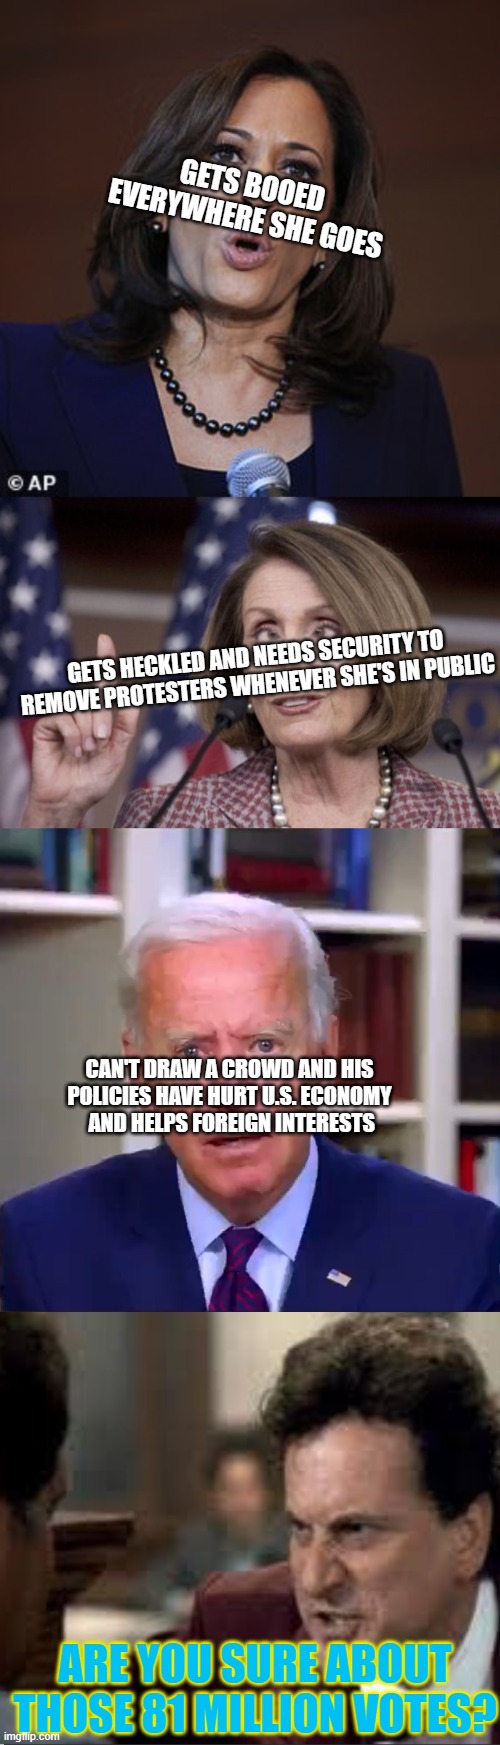 Even Obama had his fans | GETS BOOED EVERYWHERE SHE GOES; GETS HECKLED AND NEEDS SECURITY TO REMOVE PROTESTERS WHENEVER SHE'S IN PUBLIC; CAN'T DRAW A CROWD AND HIS POLICIES HAVE HURT U.S. ECONOMY
 AND HELPS FOREIGN INTERESTS; ARE YOU SURE ABOUT THOSE 81 MILLION VOTES? | image tagged in kamala o,nancy pelosi,slow joe biden dementia face,my cousin vinny | made w/ Imgflip meme maker